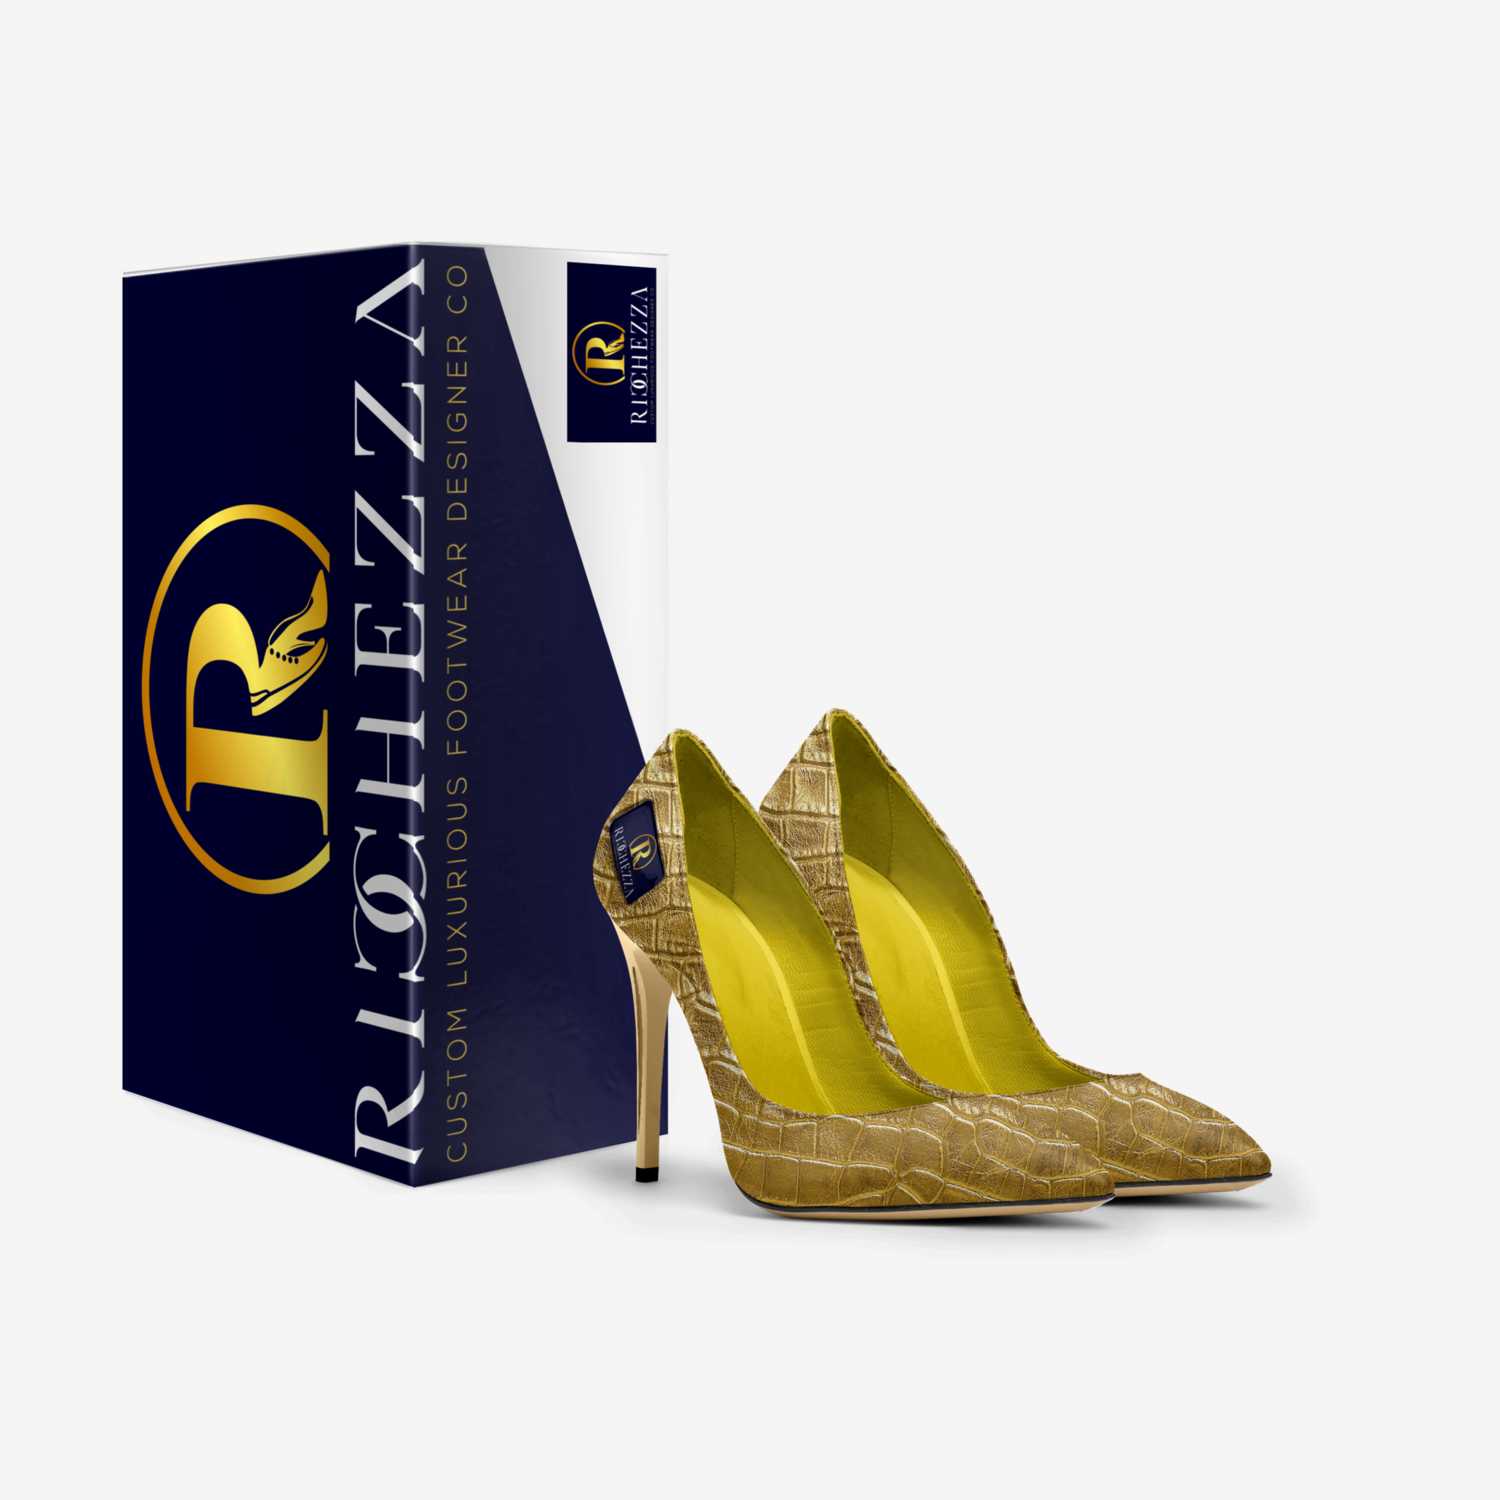 The 6 inch Sexy custom made in Italy shoes by Ricchezza Custom Footwear Designer Co. | Box view